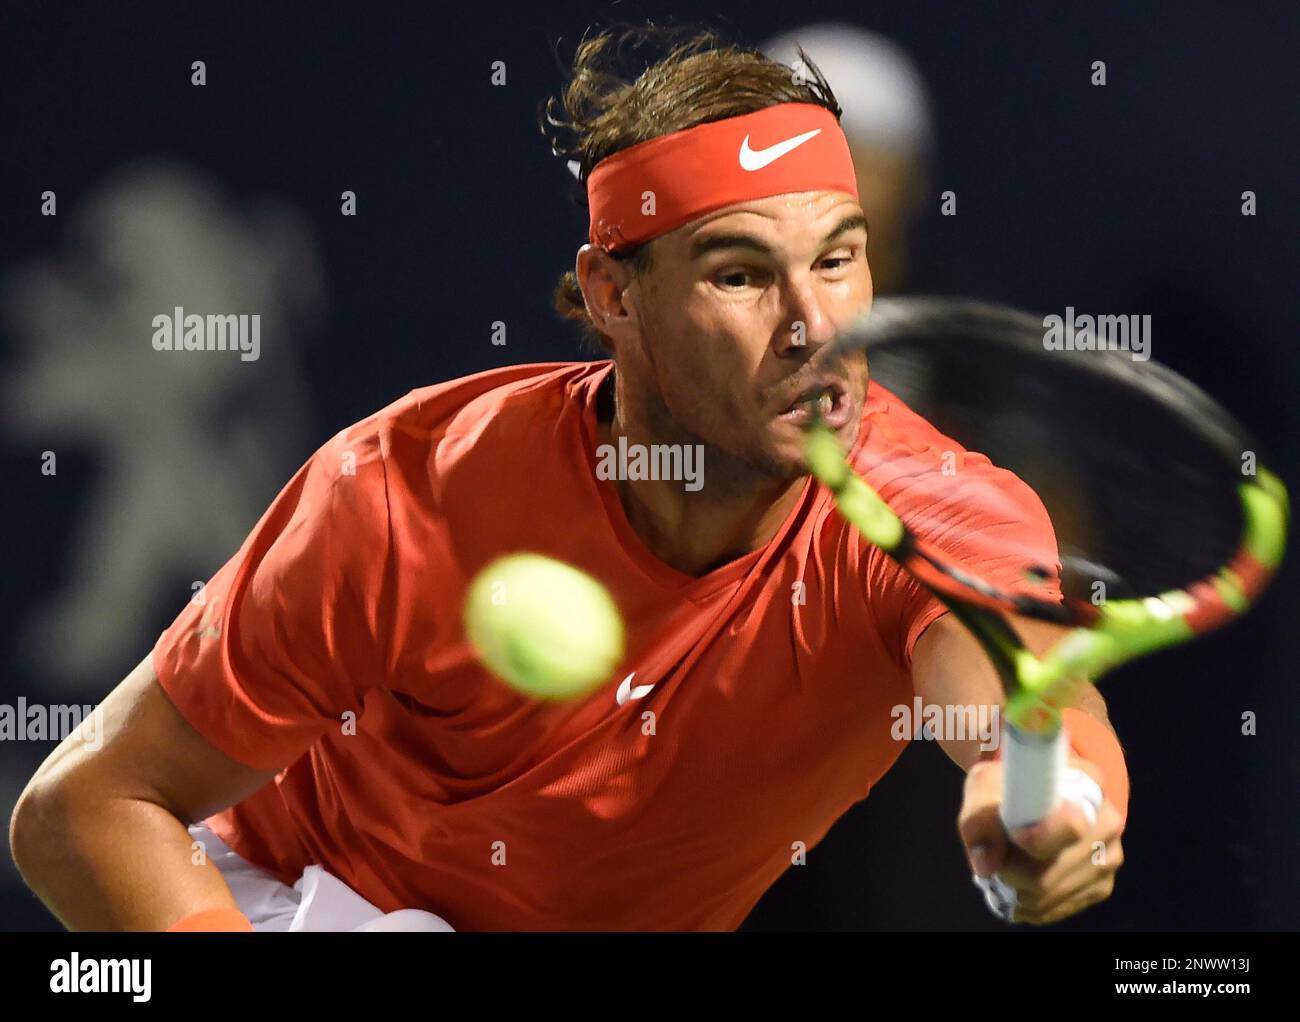 Rafael Nadal, of Spain, returns to Karen Khachanov, of Russia, during the  semifinals of the Rogers Cup men's tennis tournament in Toronto, Saturday,  Aug. 11, 2018. (Nathan Denette/The Canadian Press via AP